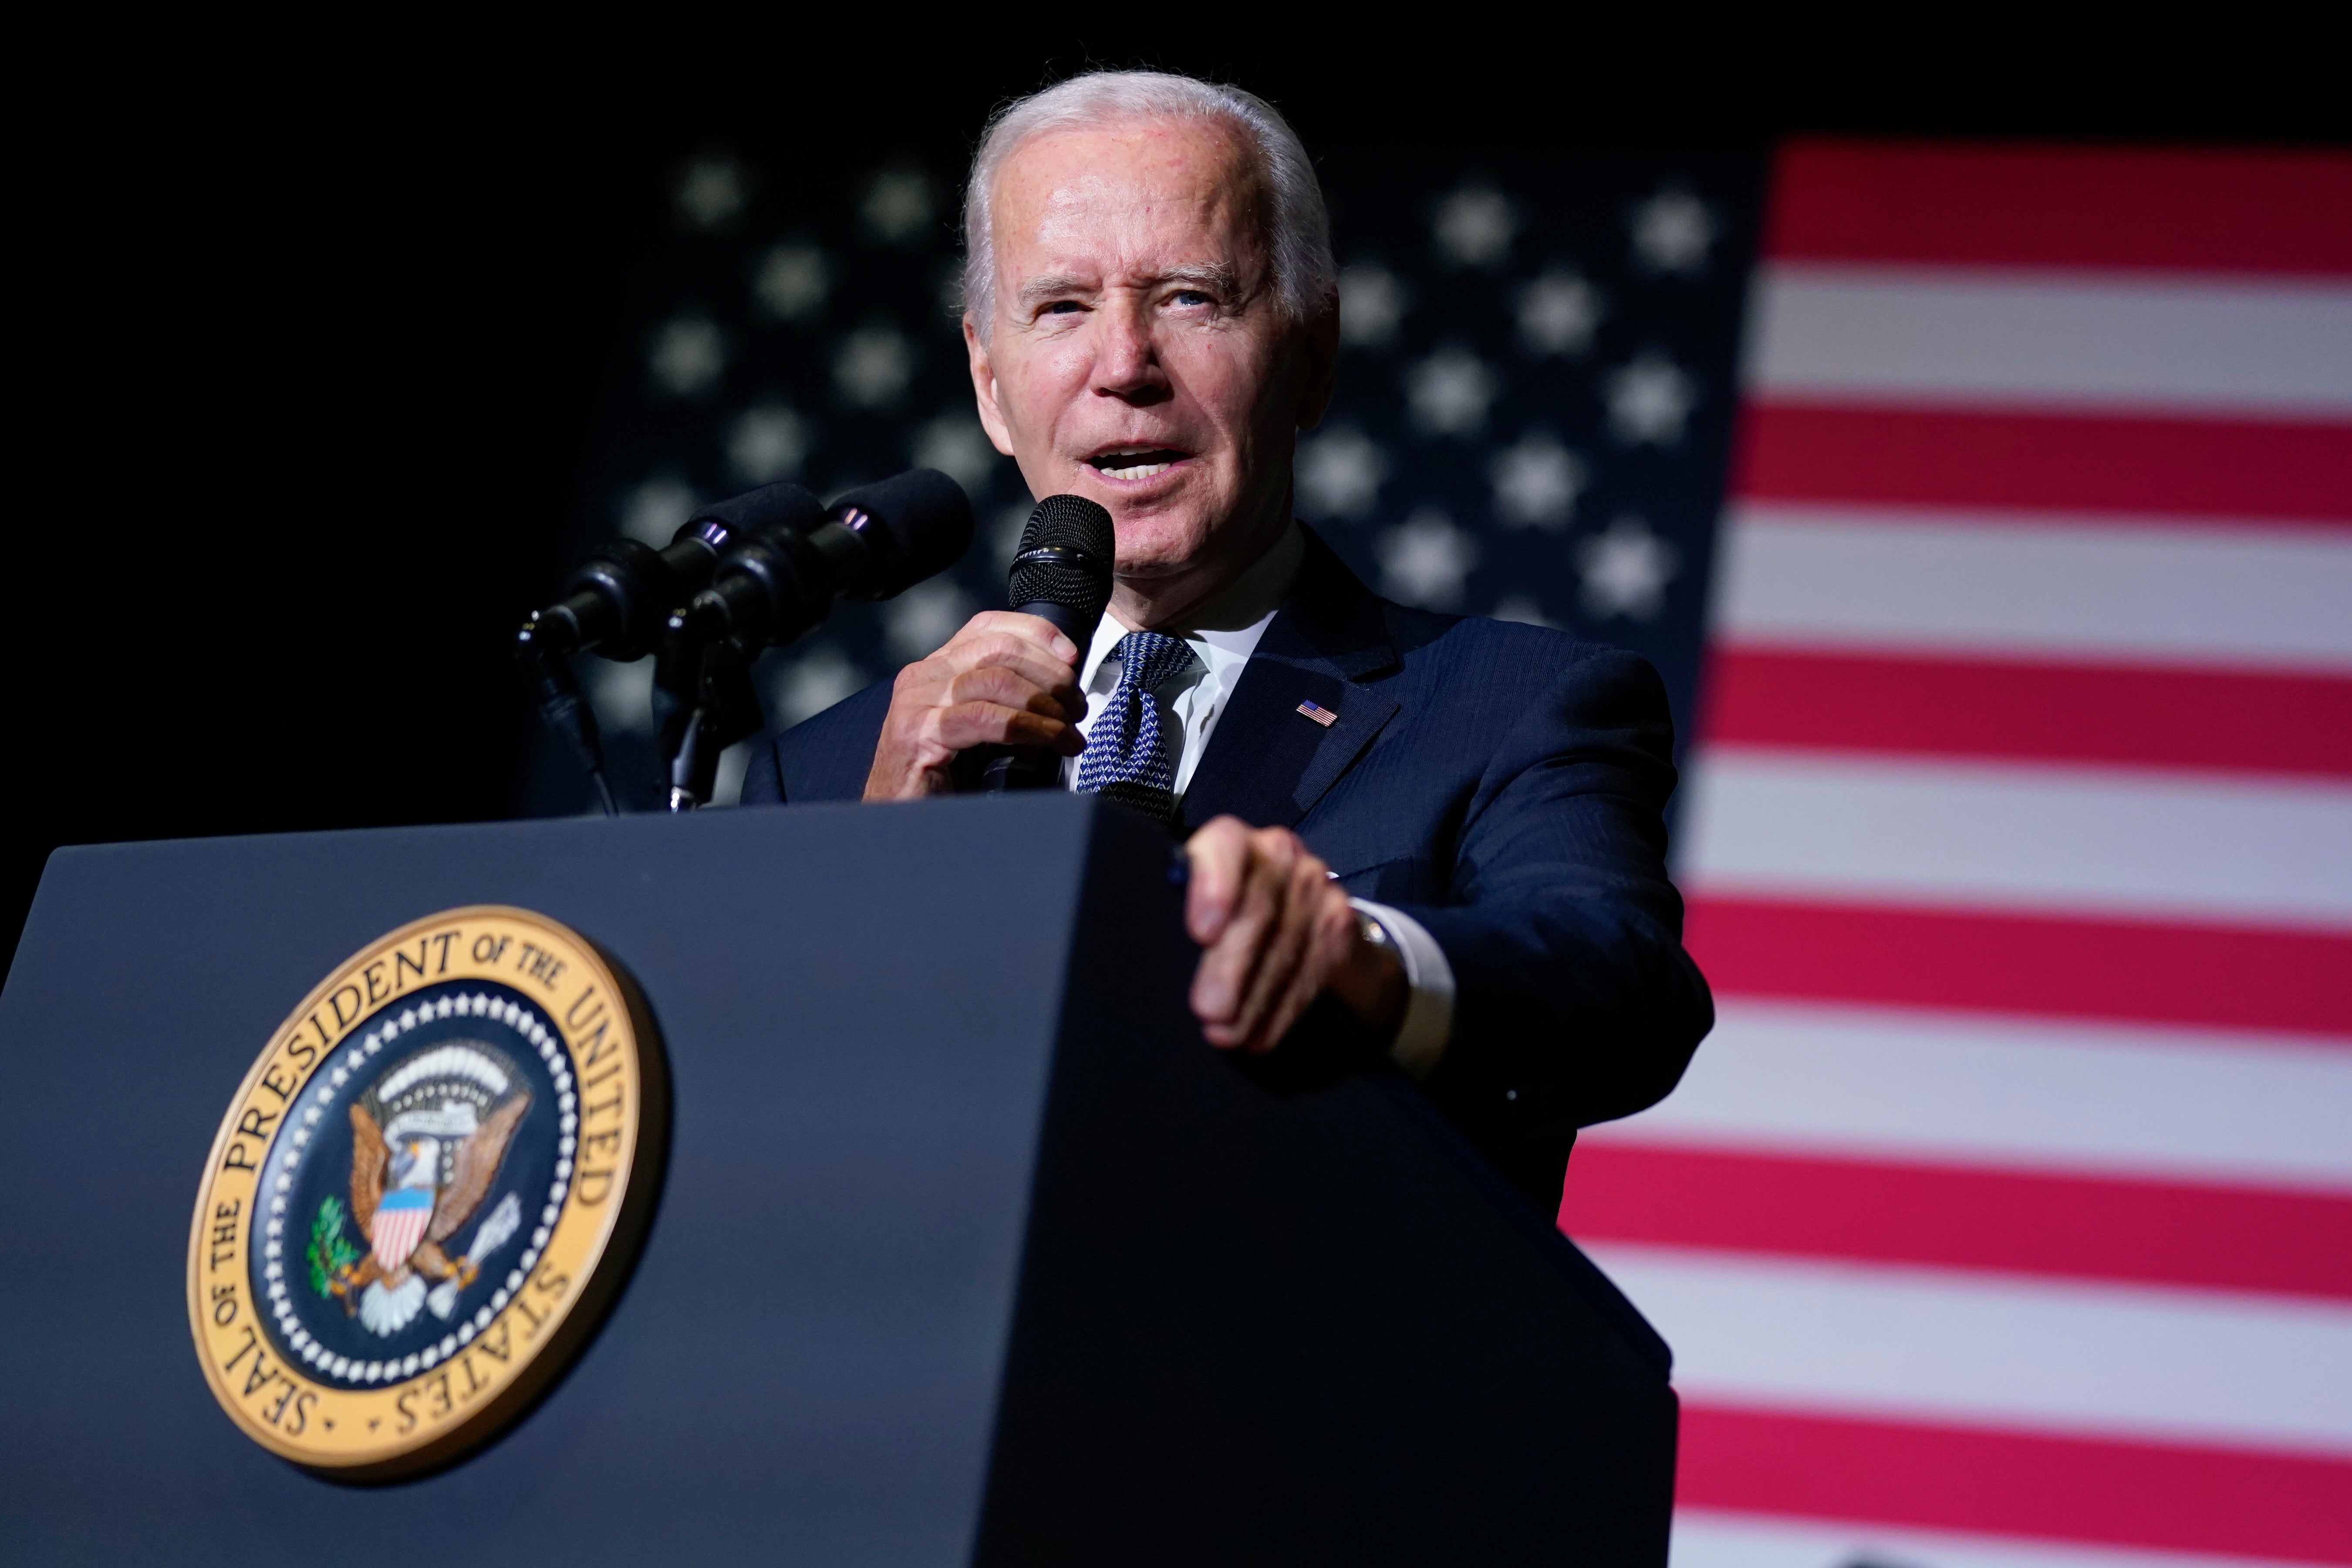 ‘I think people are going to show up and vote like they did last time,’ said President Biden